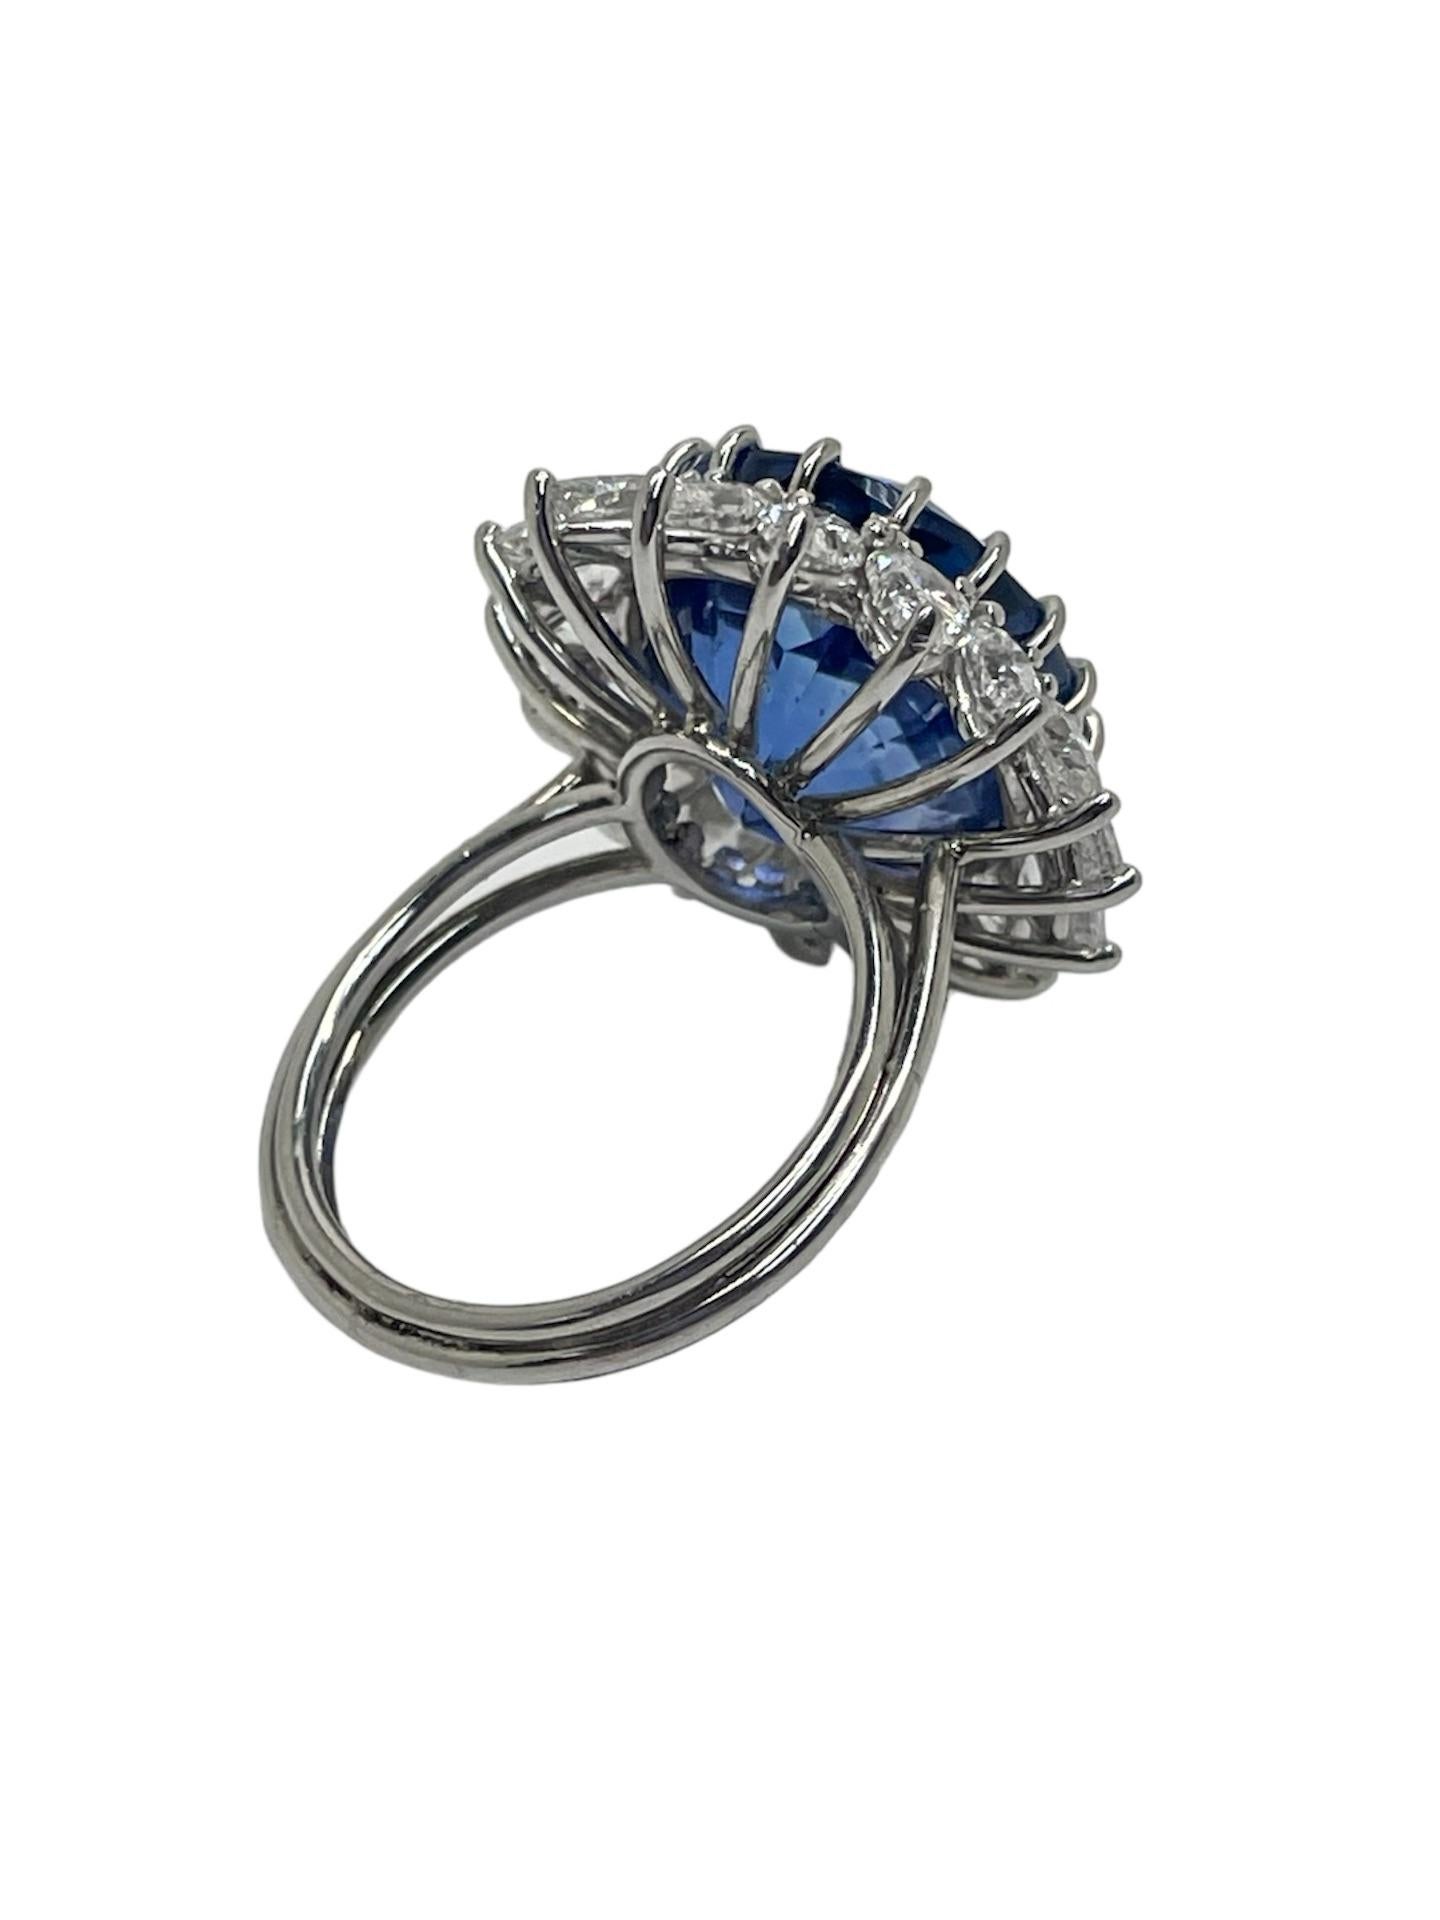 Contemporary AGL and GIA Certified 20.36 Carat Sapphire and Diamond Ring For Sale